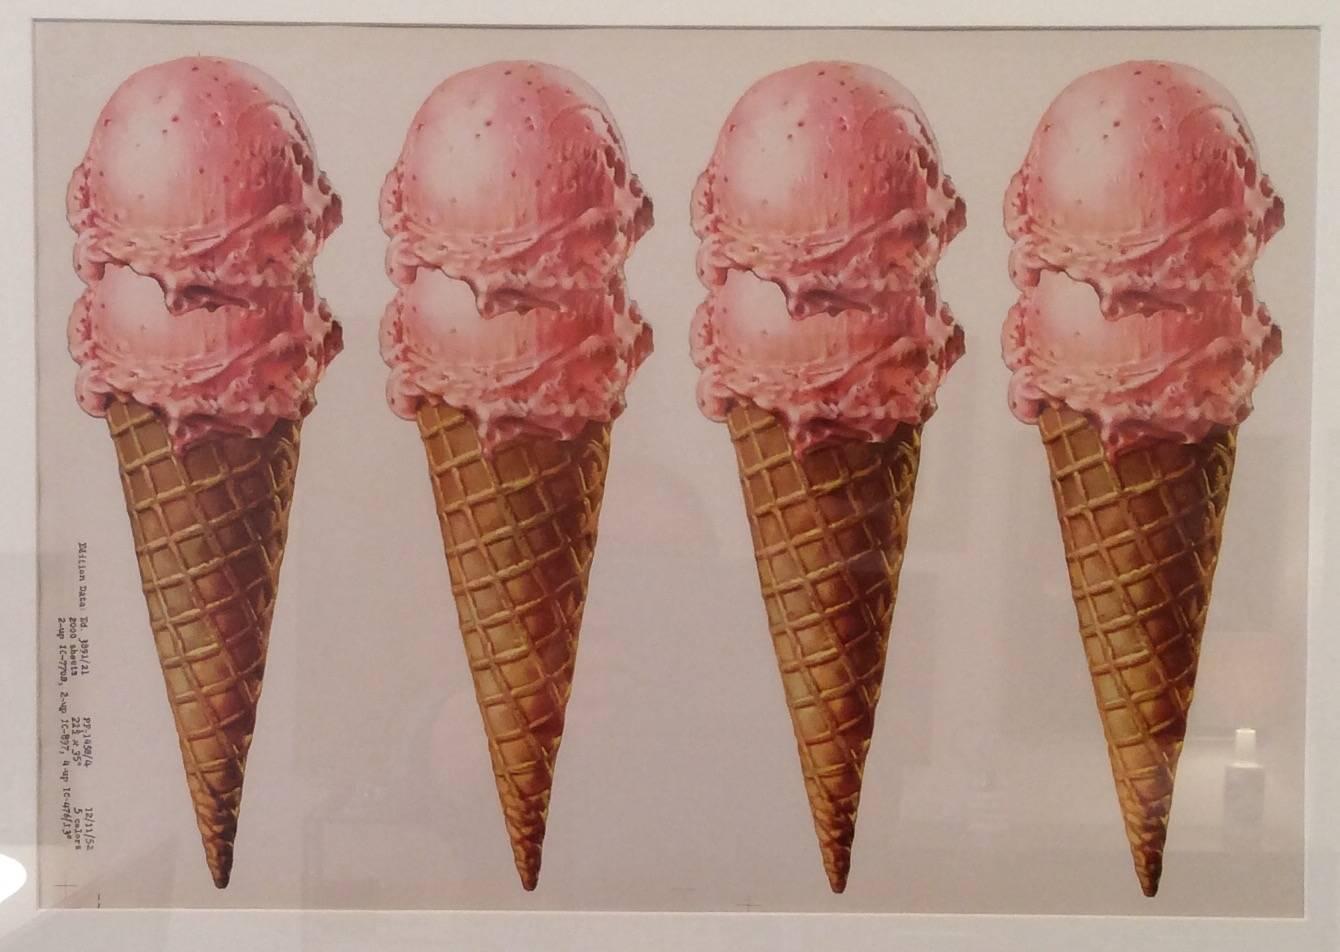 Oversized offset lithographic advertising image from the 1950s of pink ice cream cones. Newly framed. Great graphics.